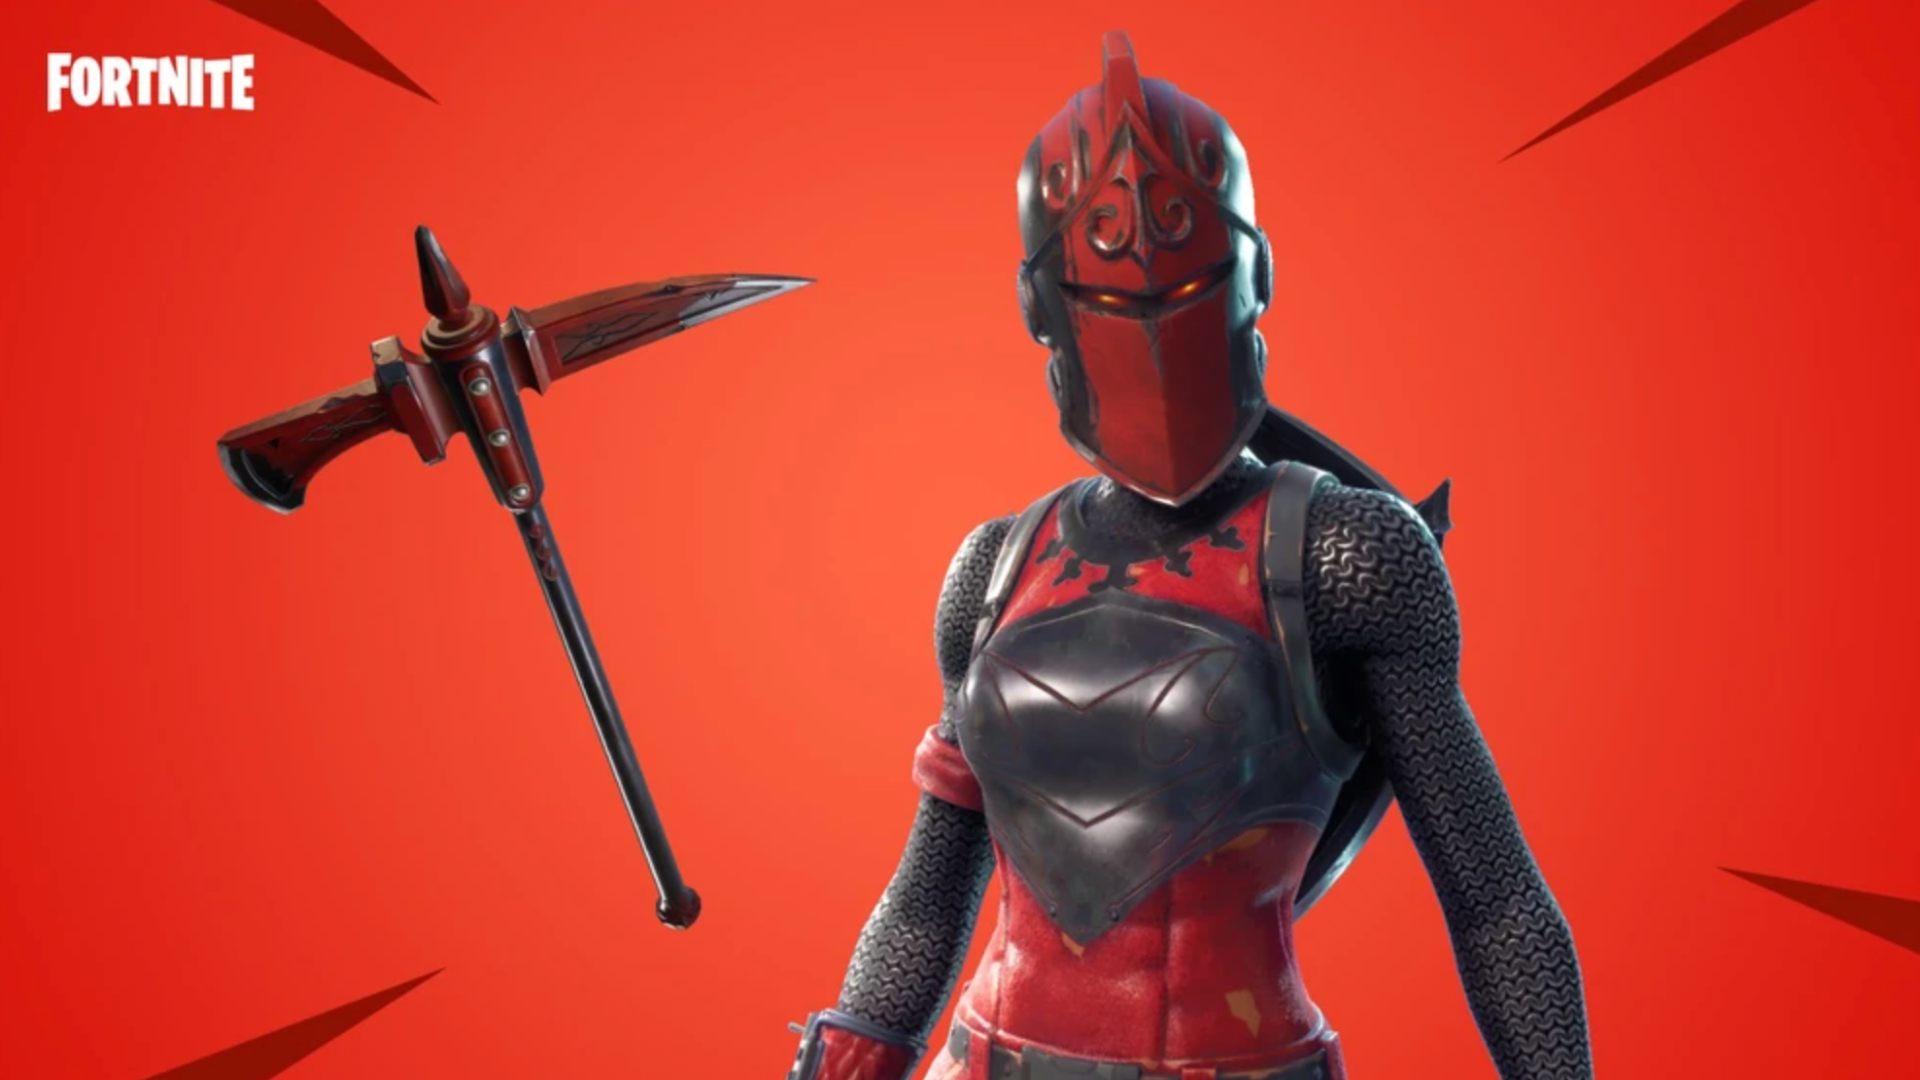 Fortnite Season X Skins Challenges Guide - All Cosmetic Variation